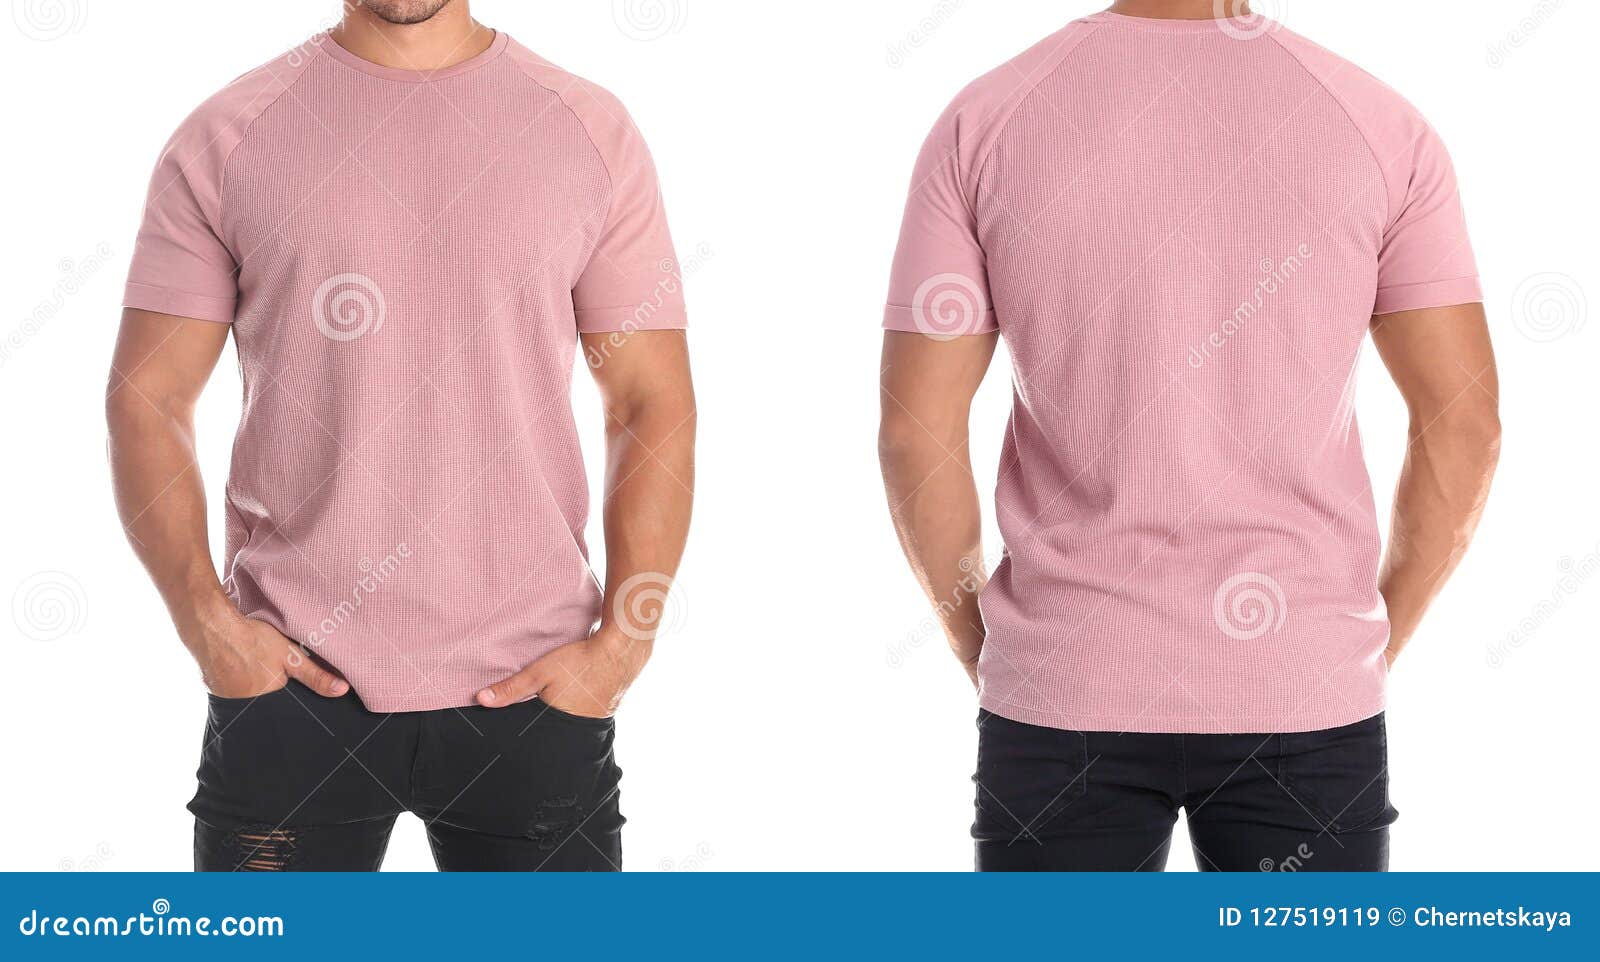 Man in Blank Pink T-shirt on White Background Stock Image - Image